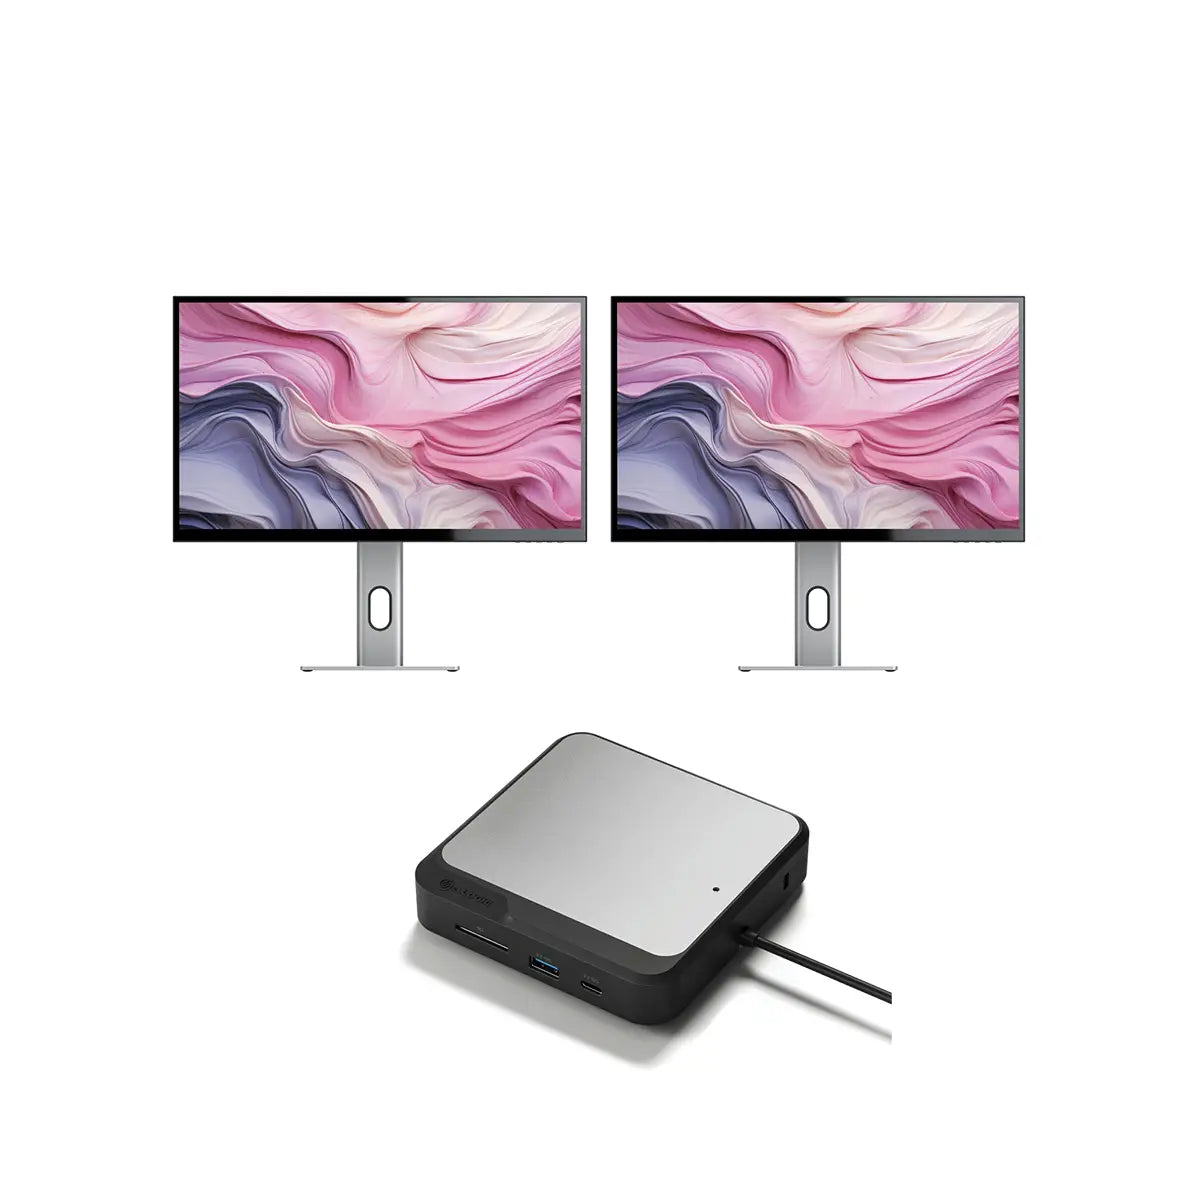 CLARITY 27" UHD 4K Monitor (Pack of 2) + Dual 4K Universal Docking Station HDMI Edition